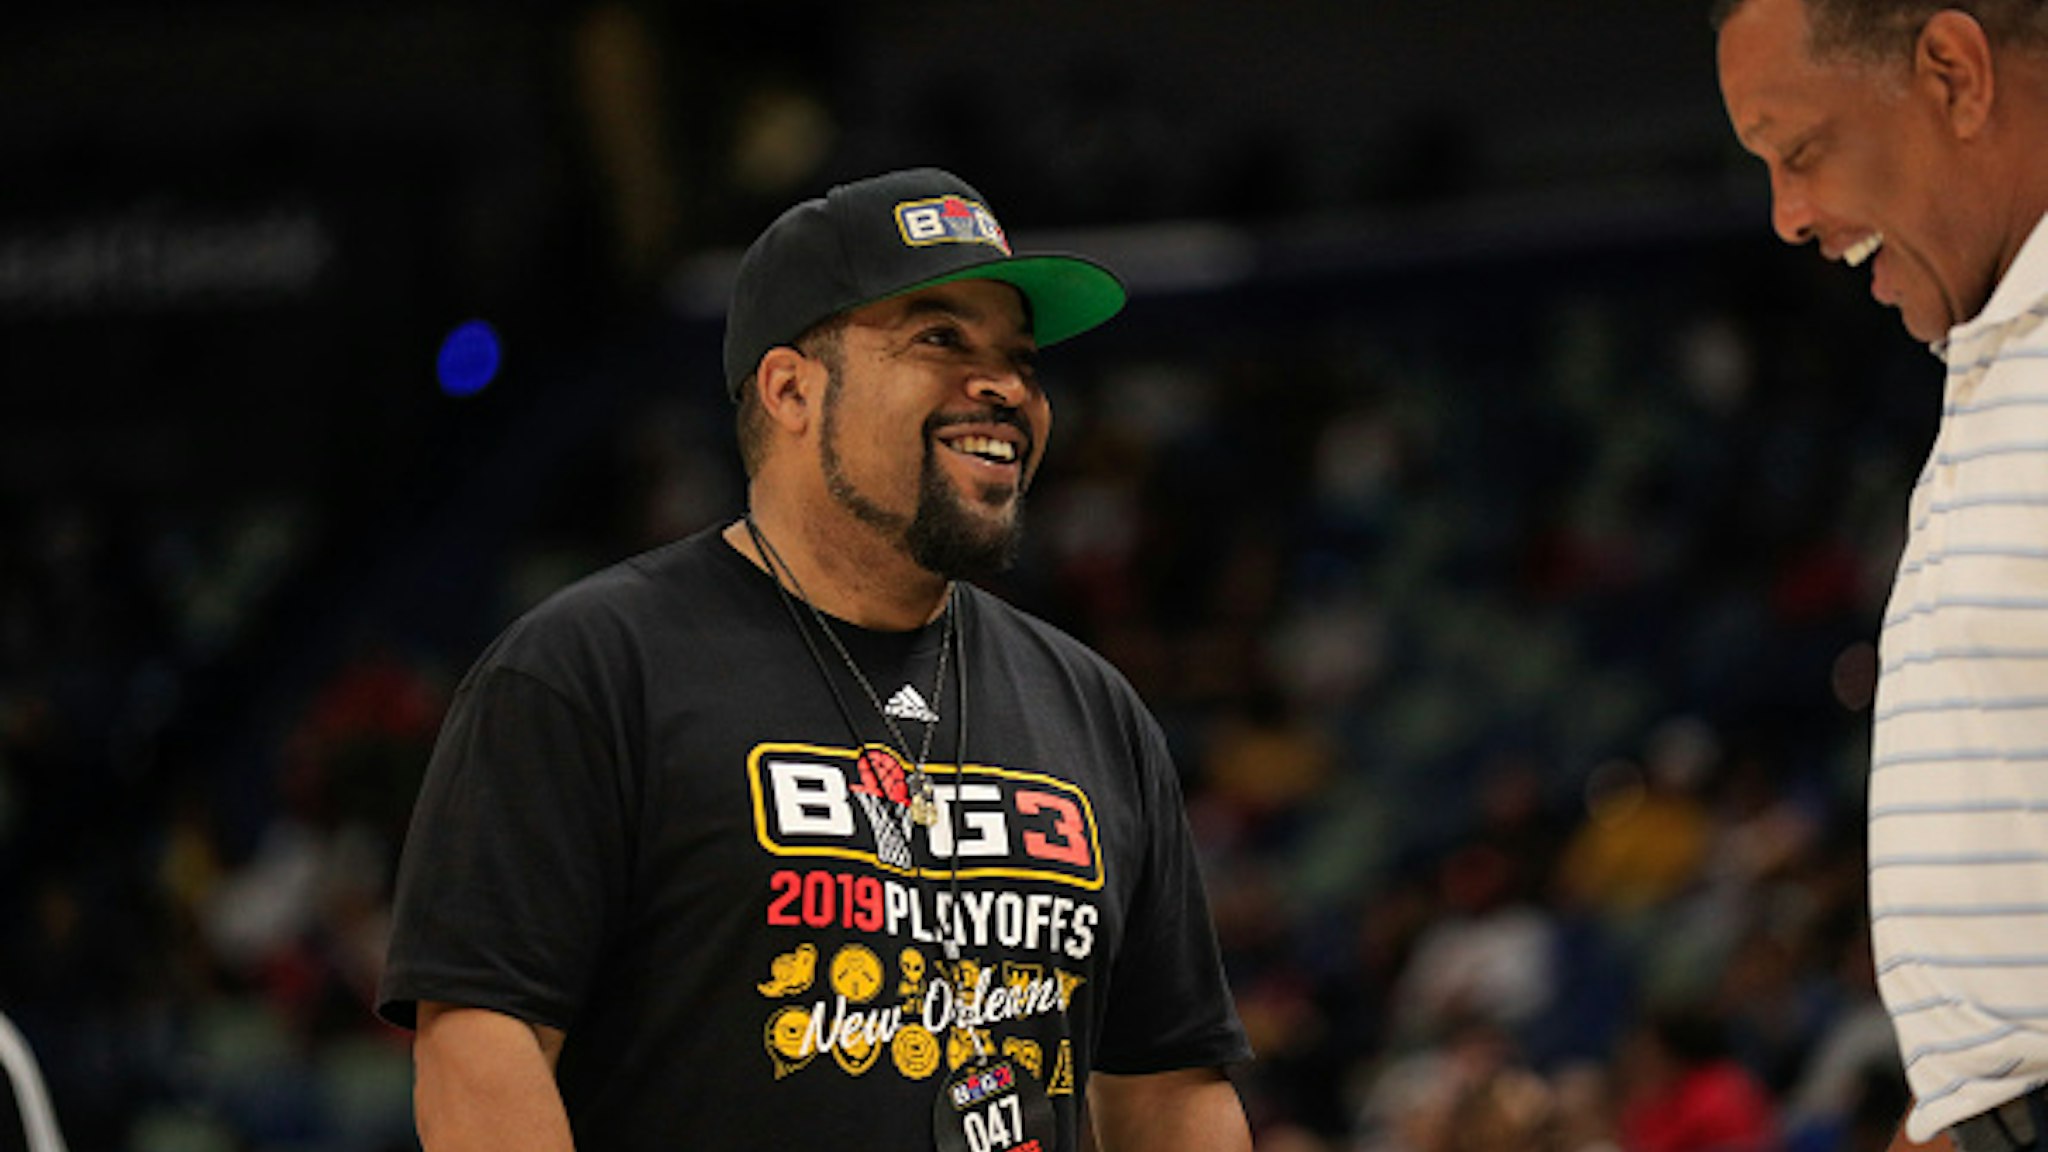 NEW ORLEANS, LA - AUGUST 25: BIG 3 founder Ice Cube talks with New Orleans Pelicans head coach Alvin Gentry during the BIG3 3-on-3 basketball league game on August 25, 2019 at the Smoothie King Center in New Orleans, LA.